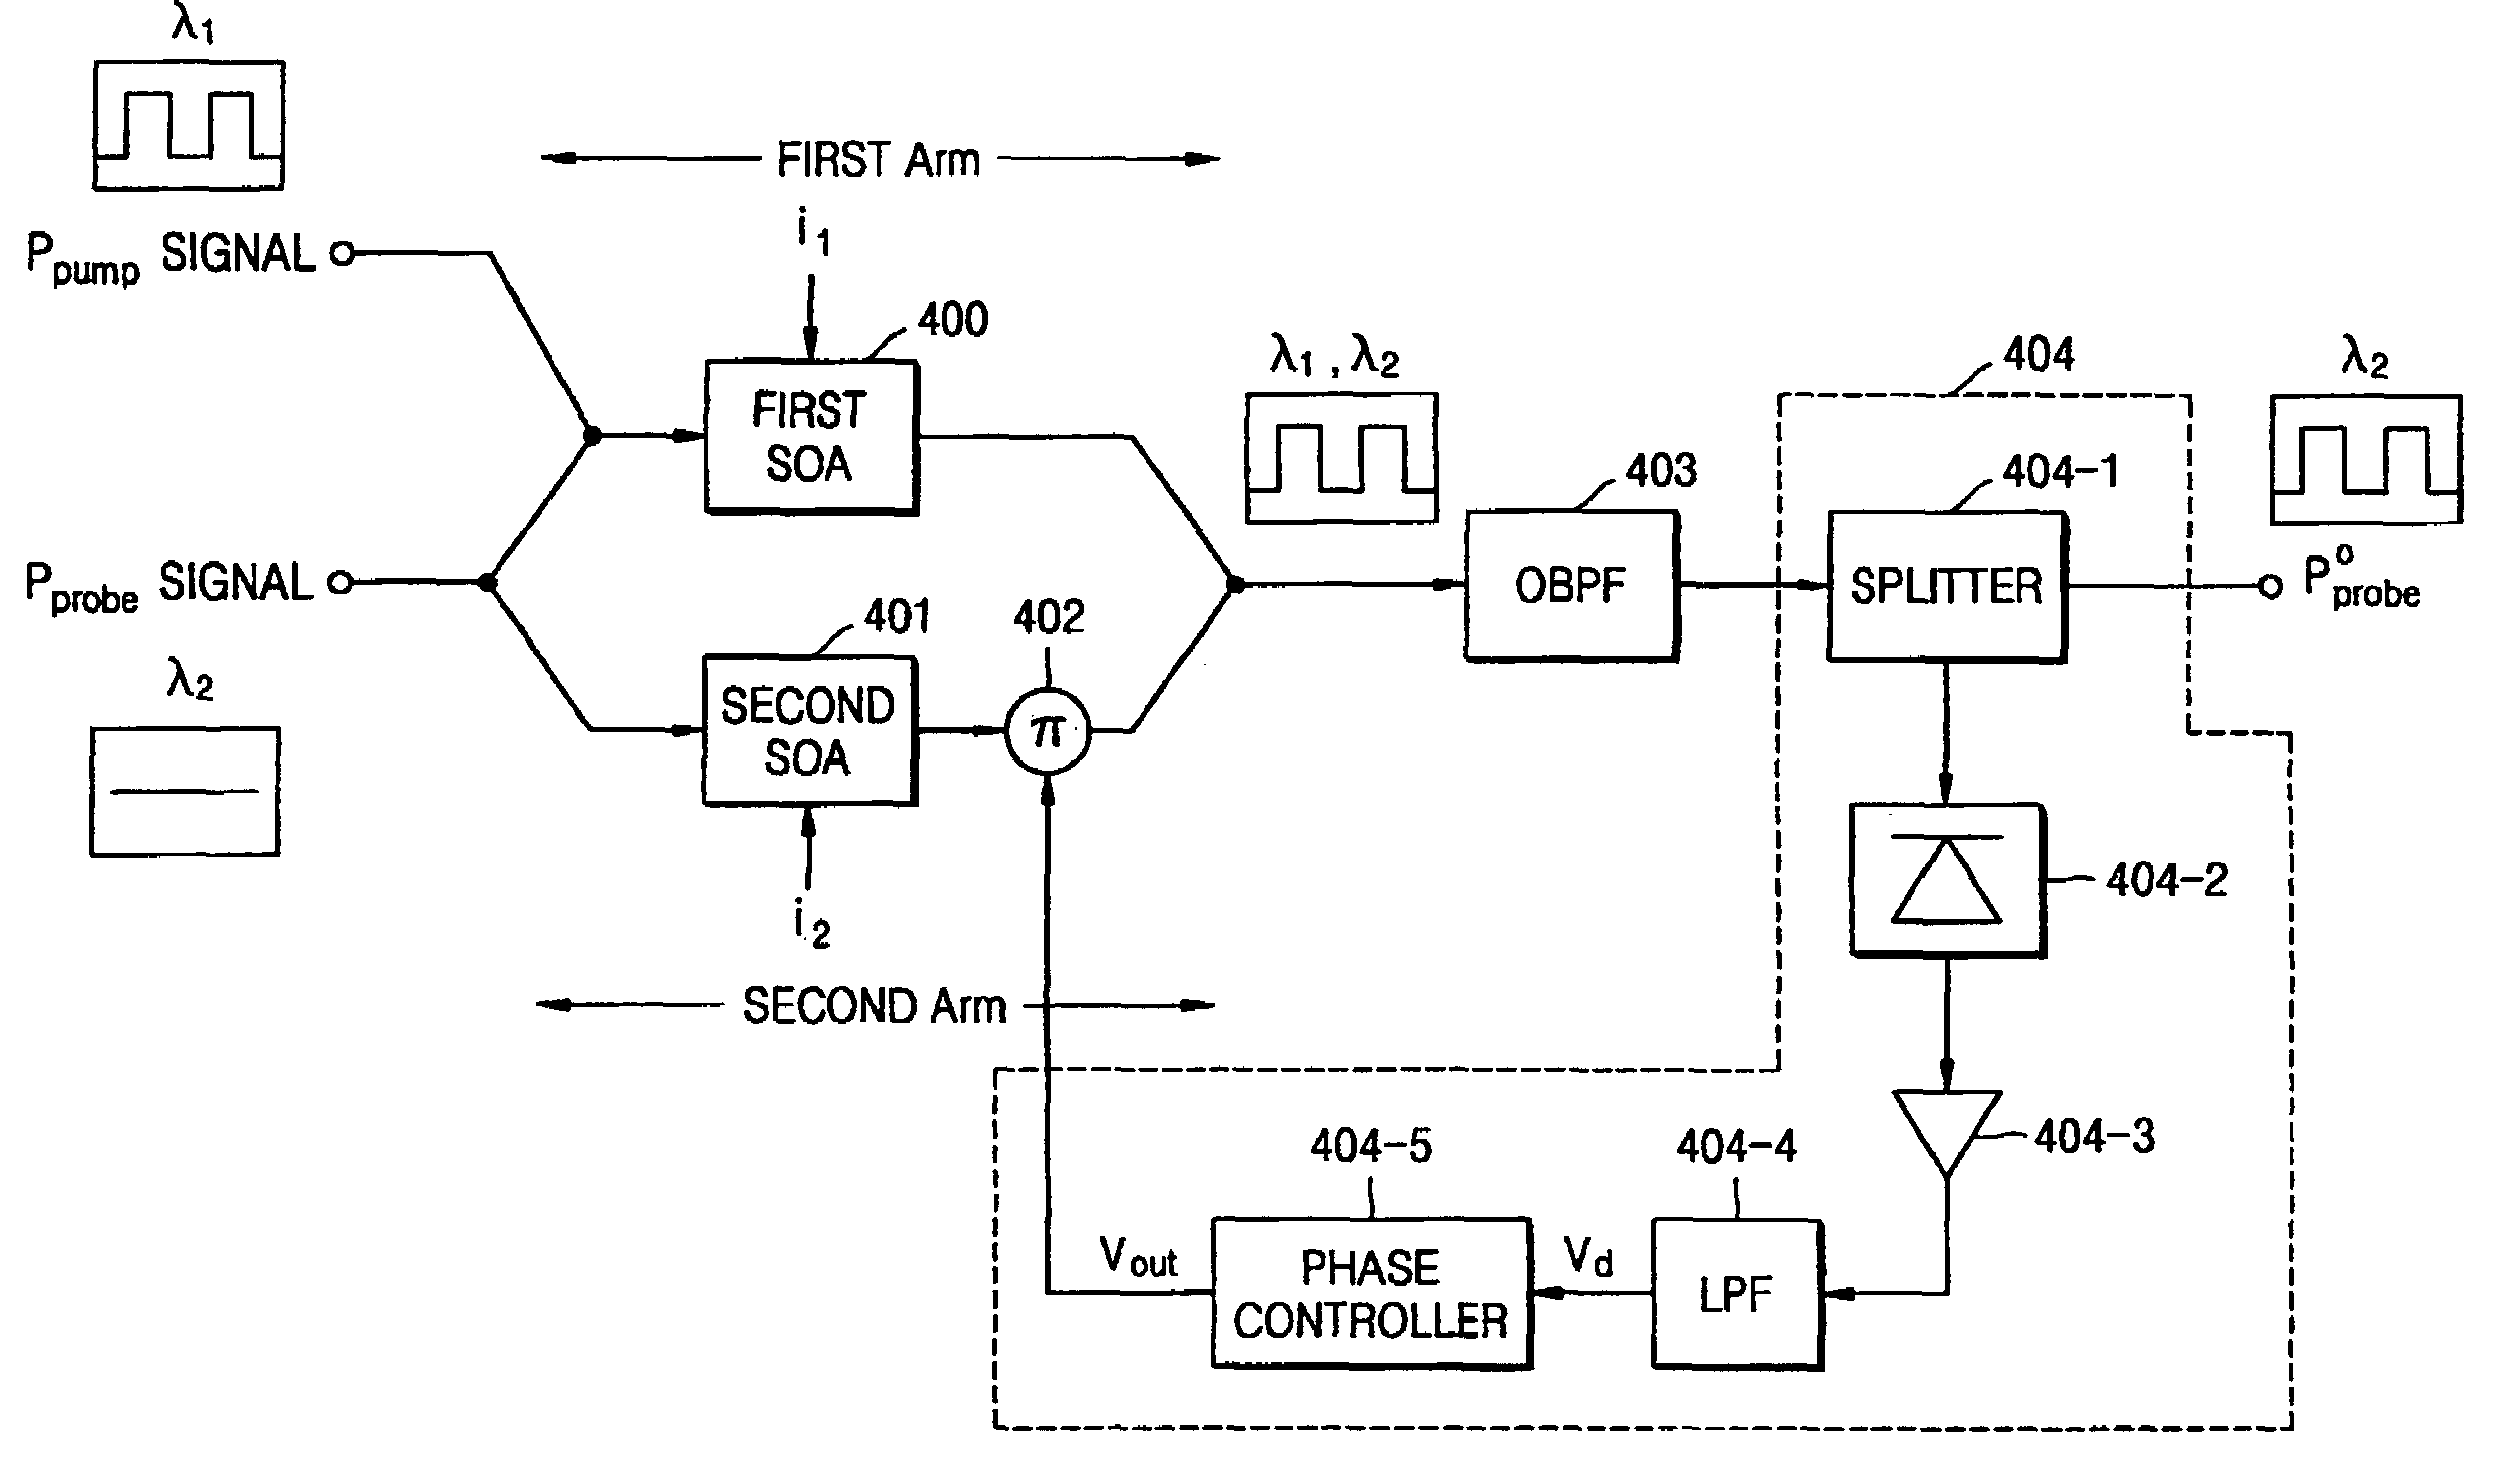 Phase optimization apparatus and method for obtaining maximum extinction ratio in mach-zehnder interferometer wavelength converter using cross phase modulation of semiconductor optical amplifier